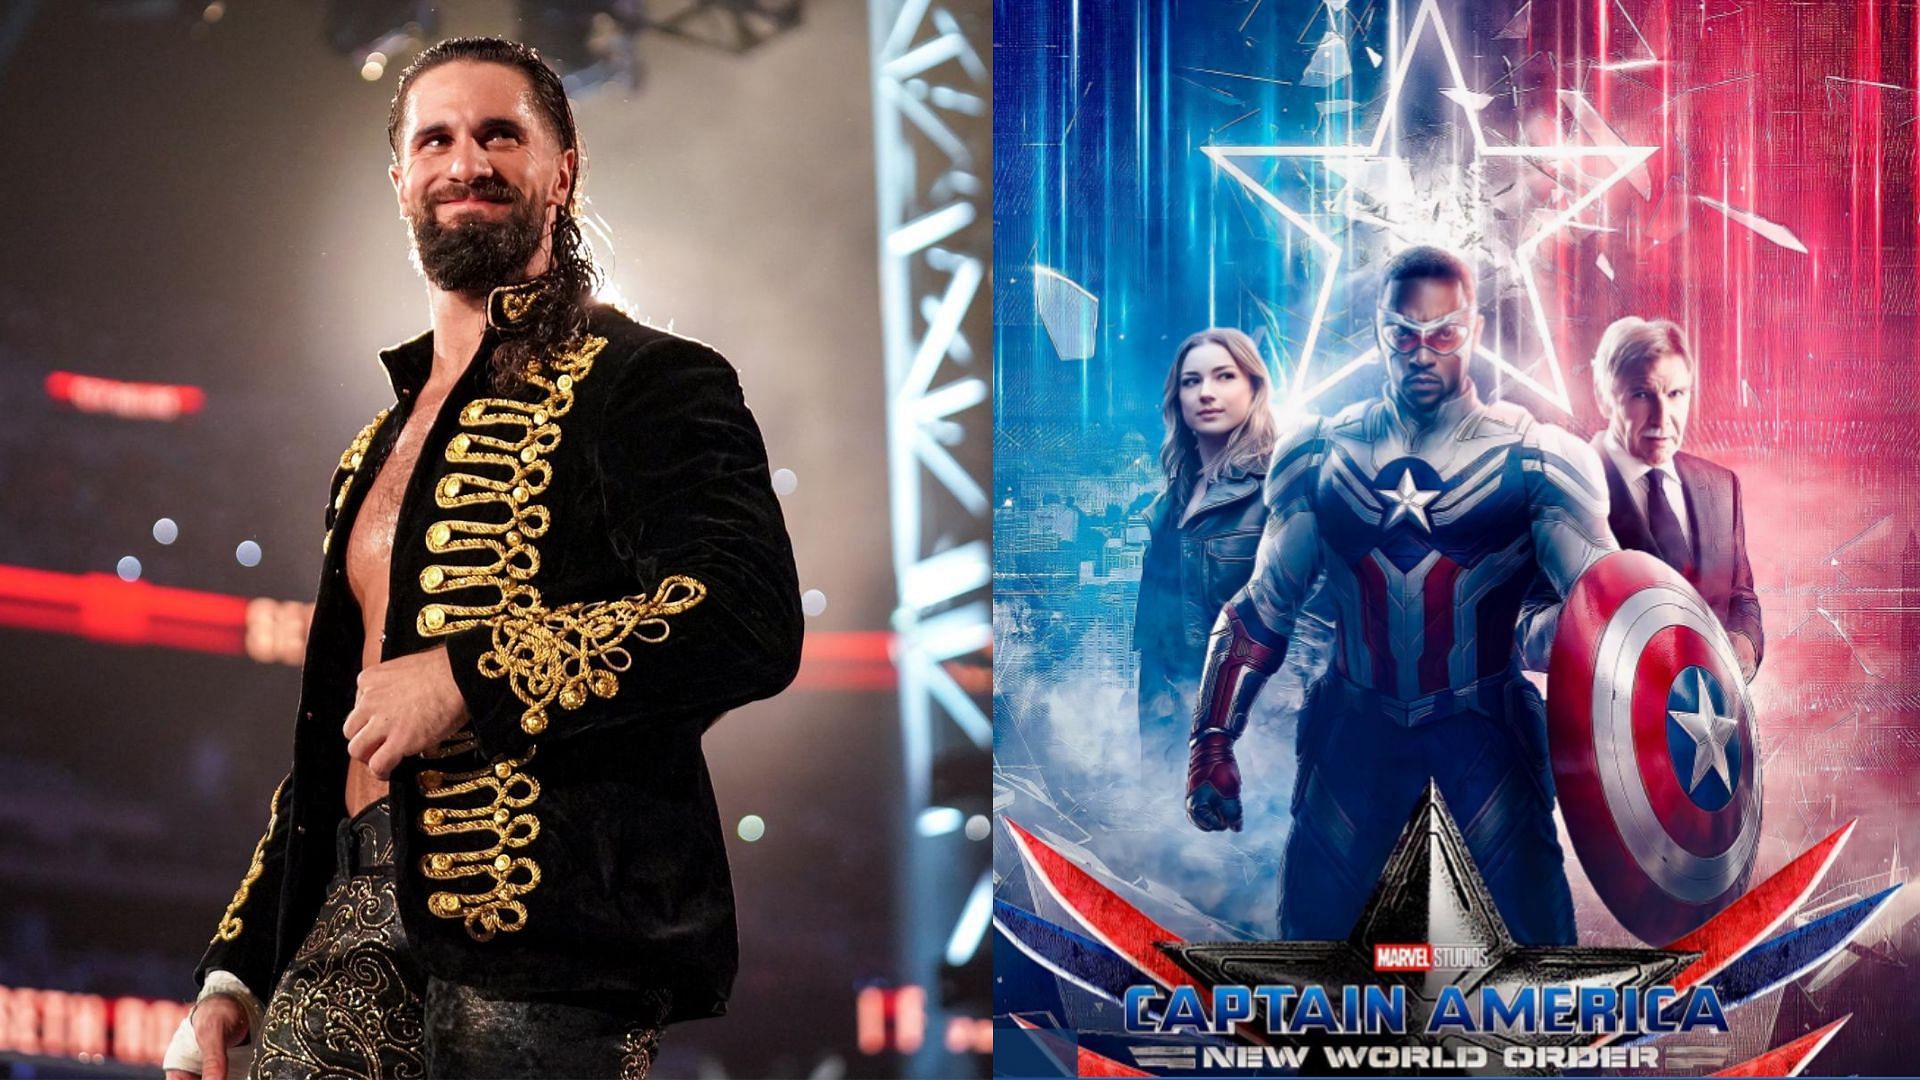 Seth Rollins is the latest WWE star to join the Marvel Cinematic Universe